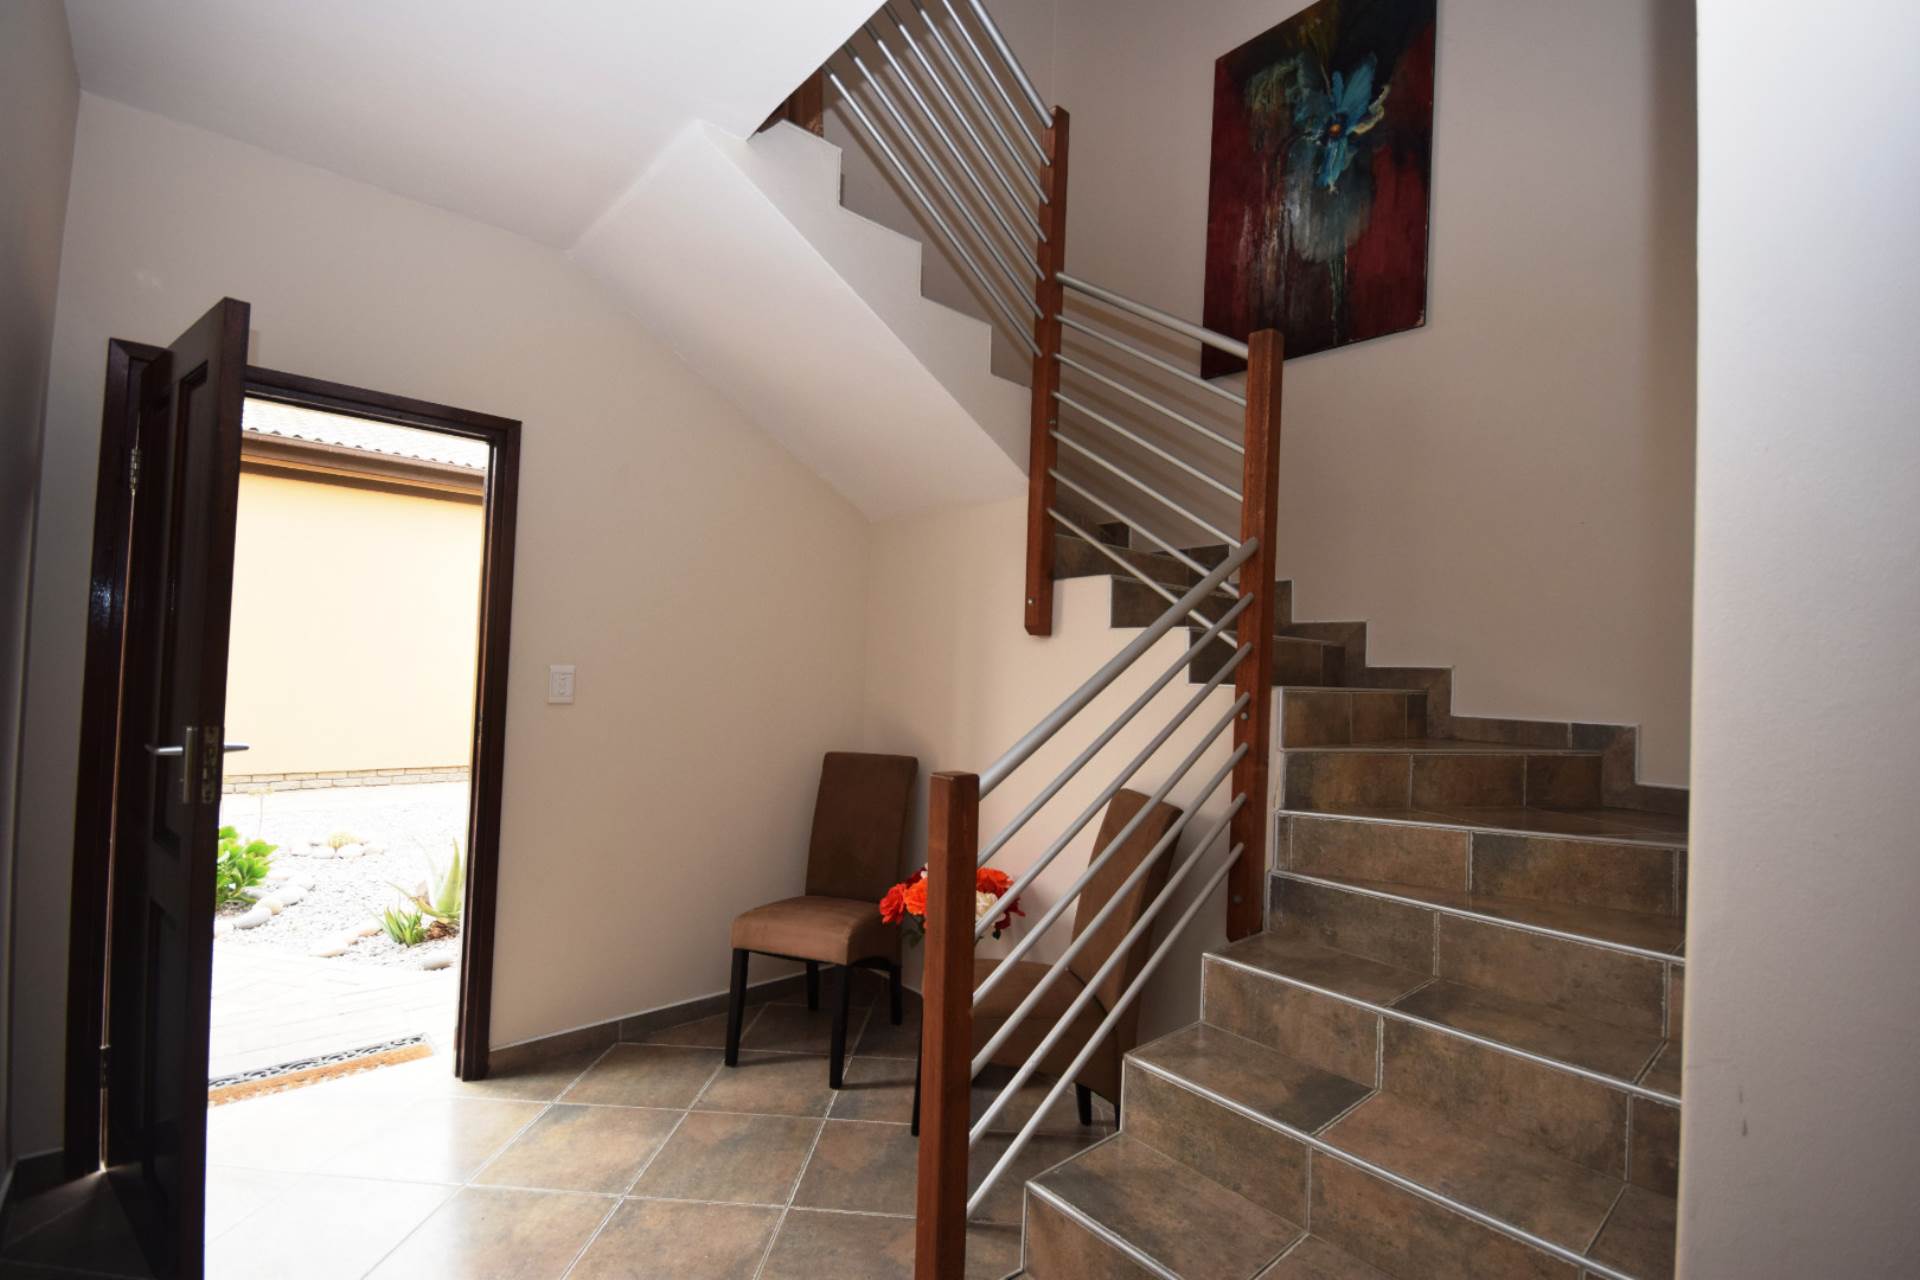 STAIRS TO FIRST LEVEL